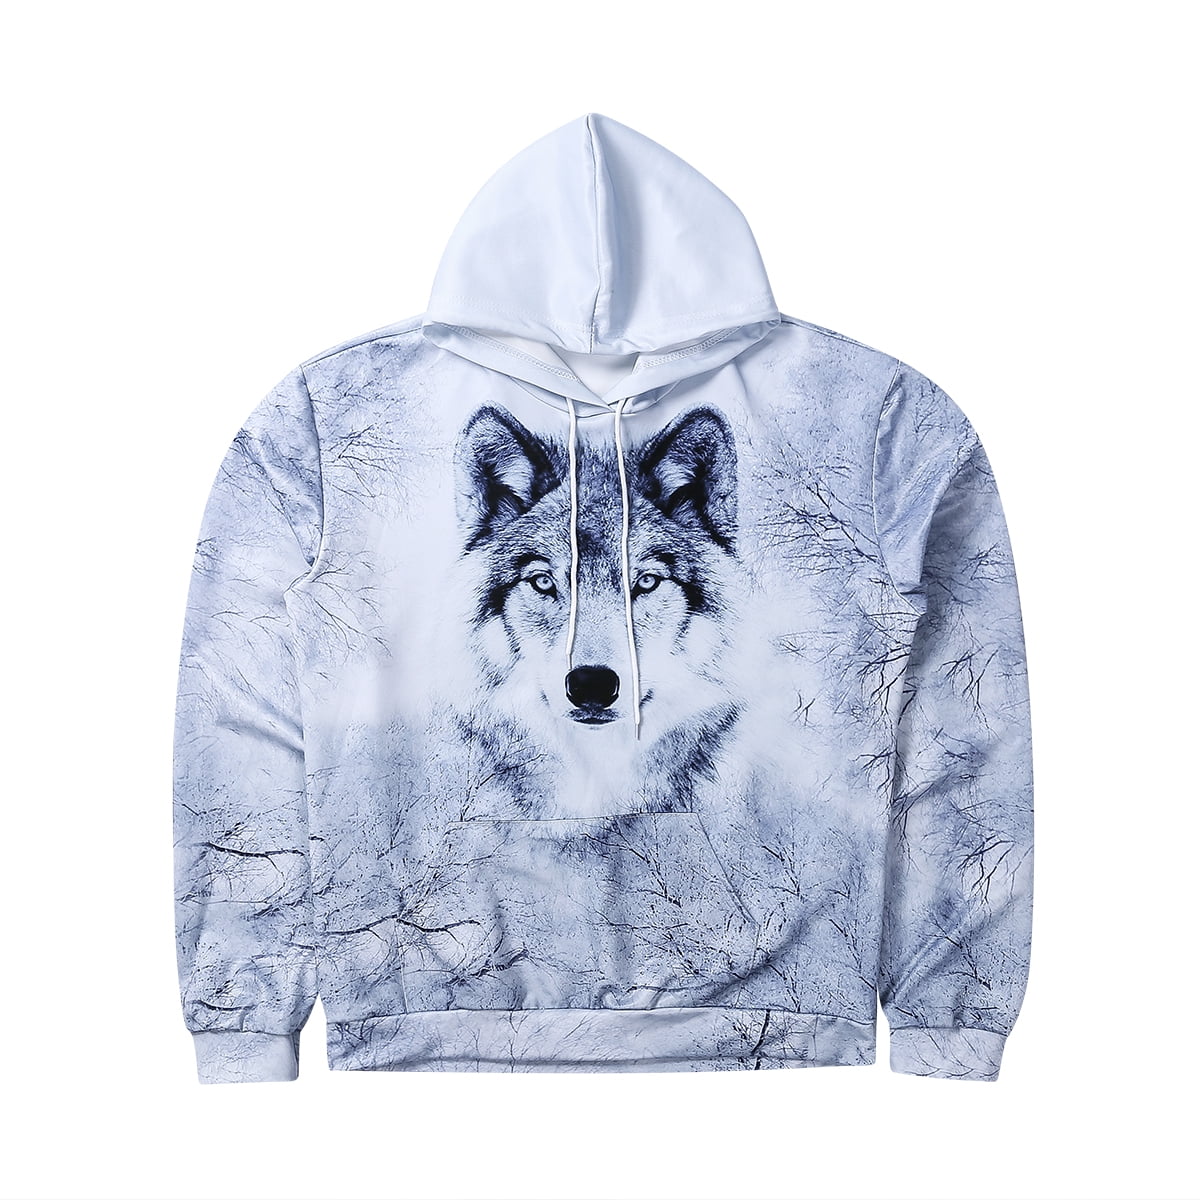 Howling Wolf Hoodie Pullover Shirt Boys And Girls Sweatshirt Xmas Gifts Coat Top